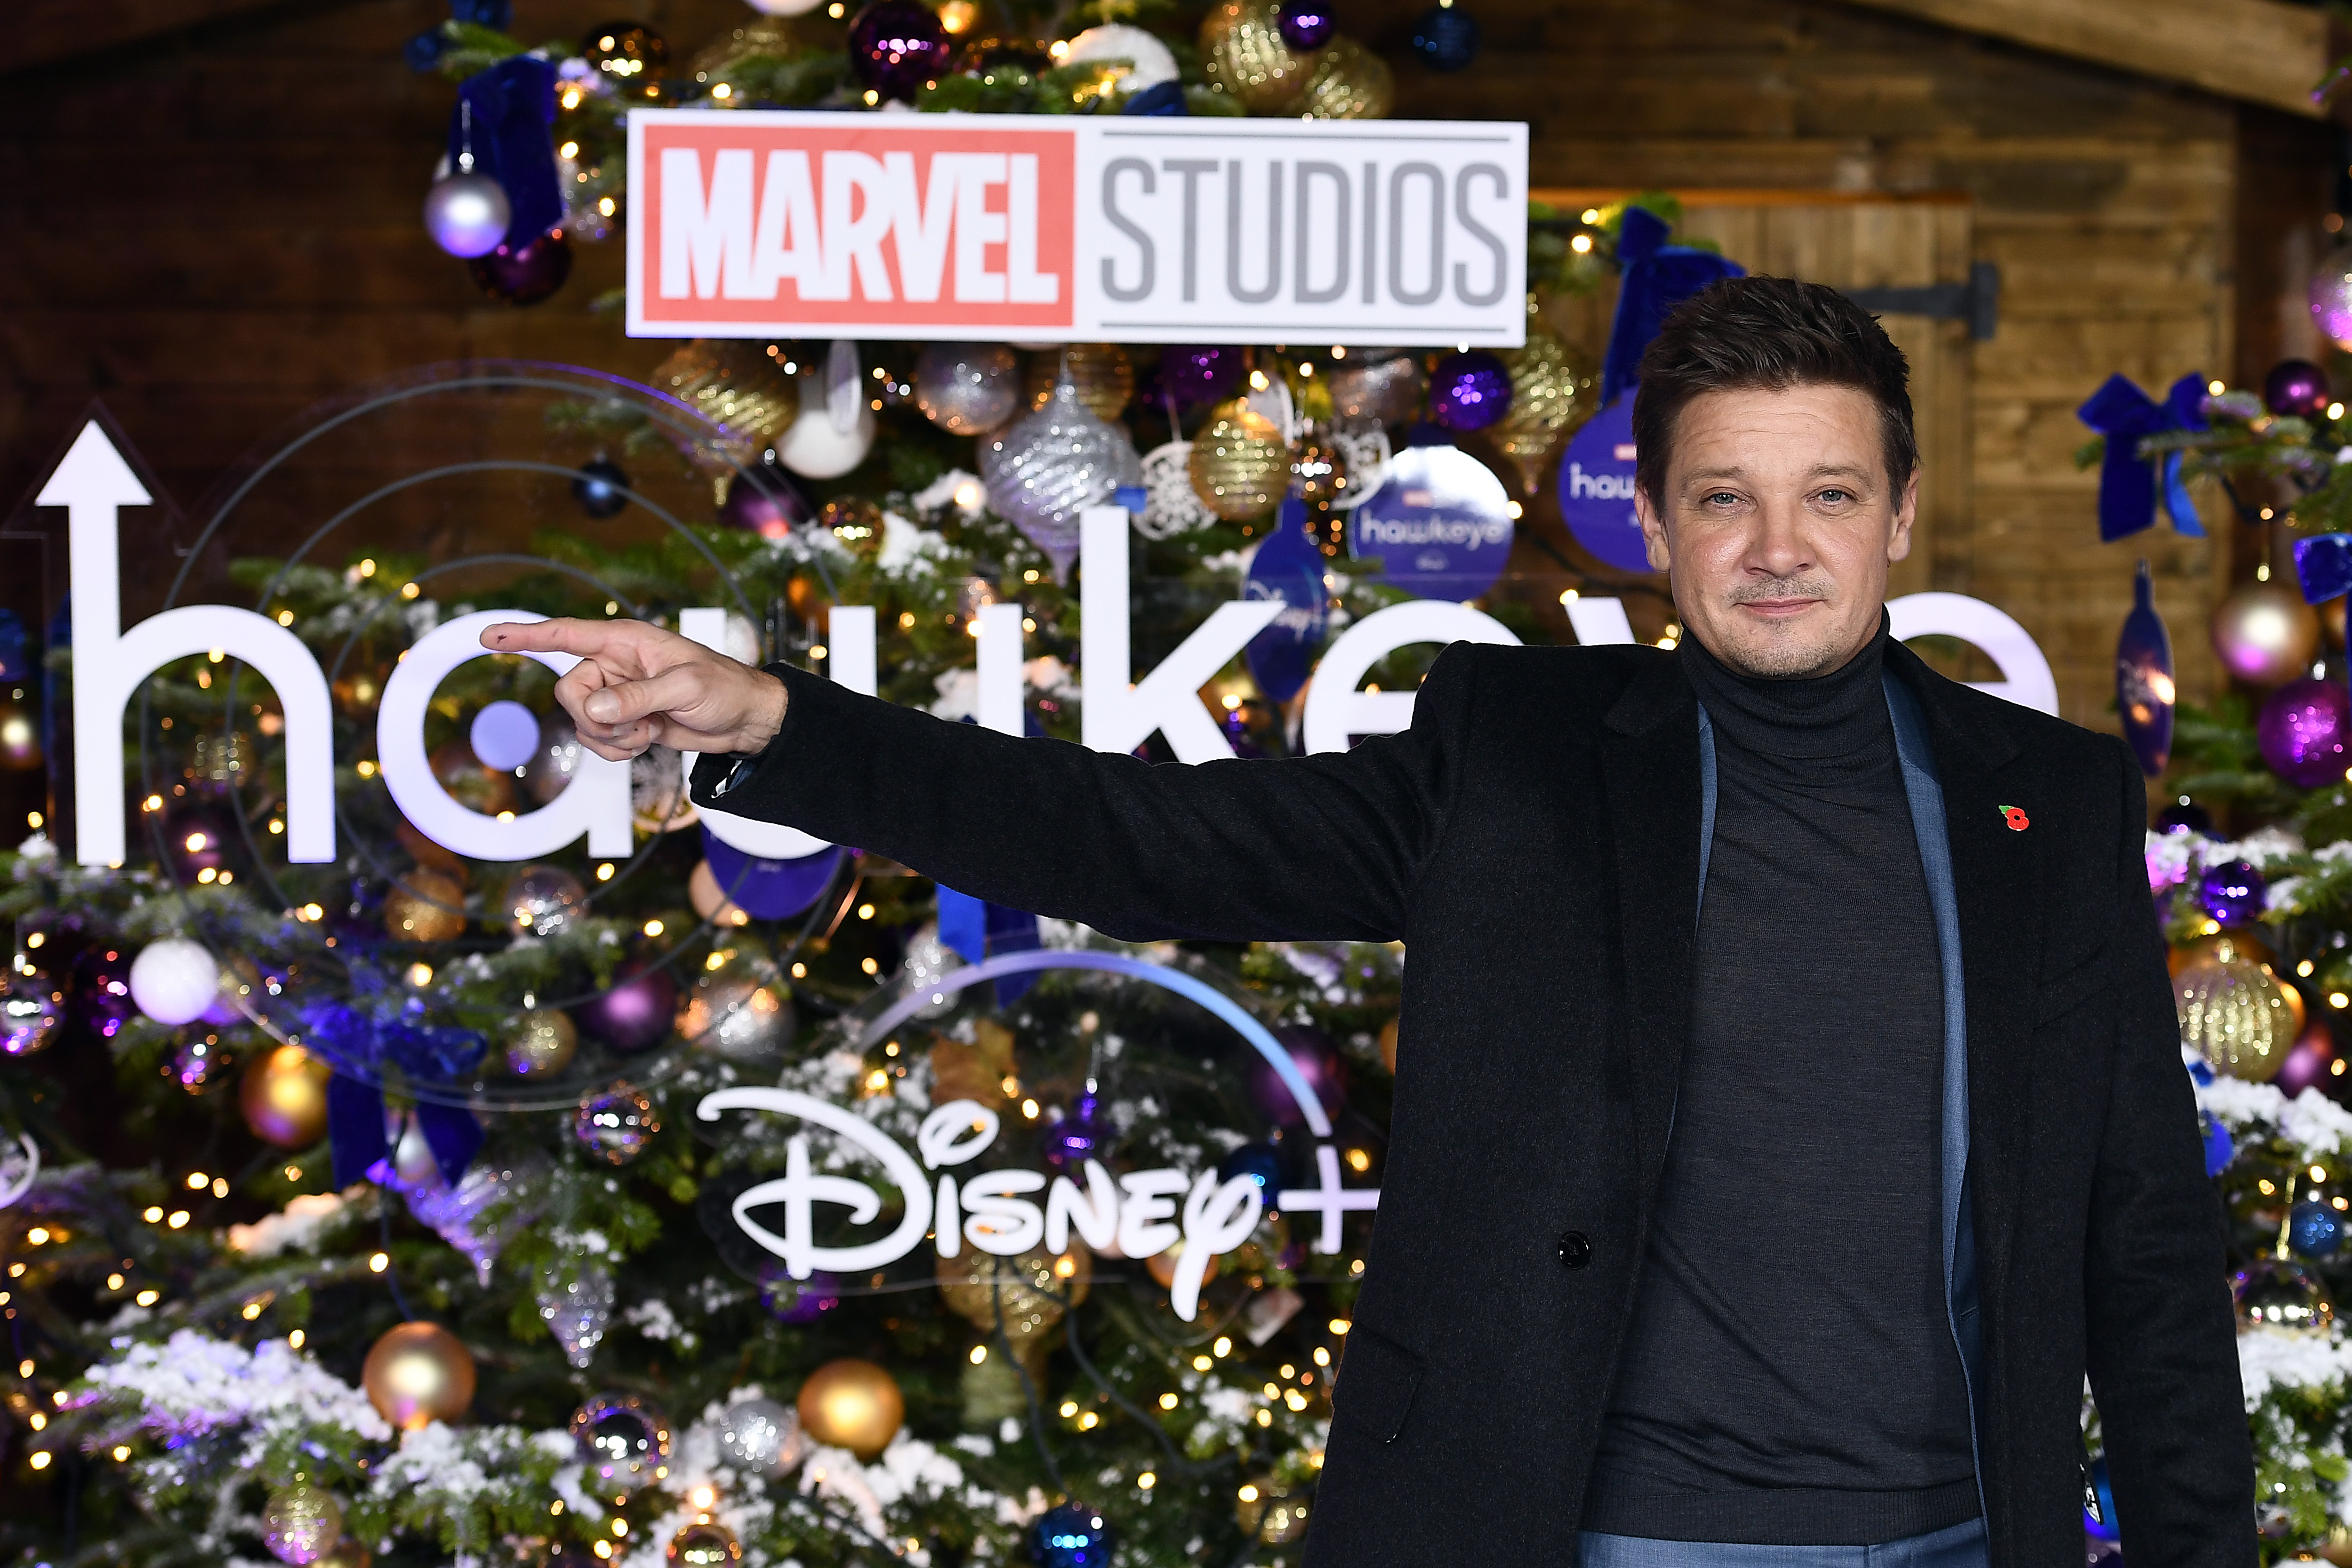 'Hawkeye' star Jeremy Renner, who plays Clint Barton, poses in front of a sign for his upcoming Marvel Disney+ show and a Christmas tree. Renner wears a black coat over a dark gray turtleneck sweater.